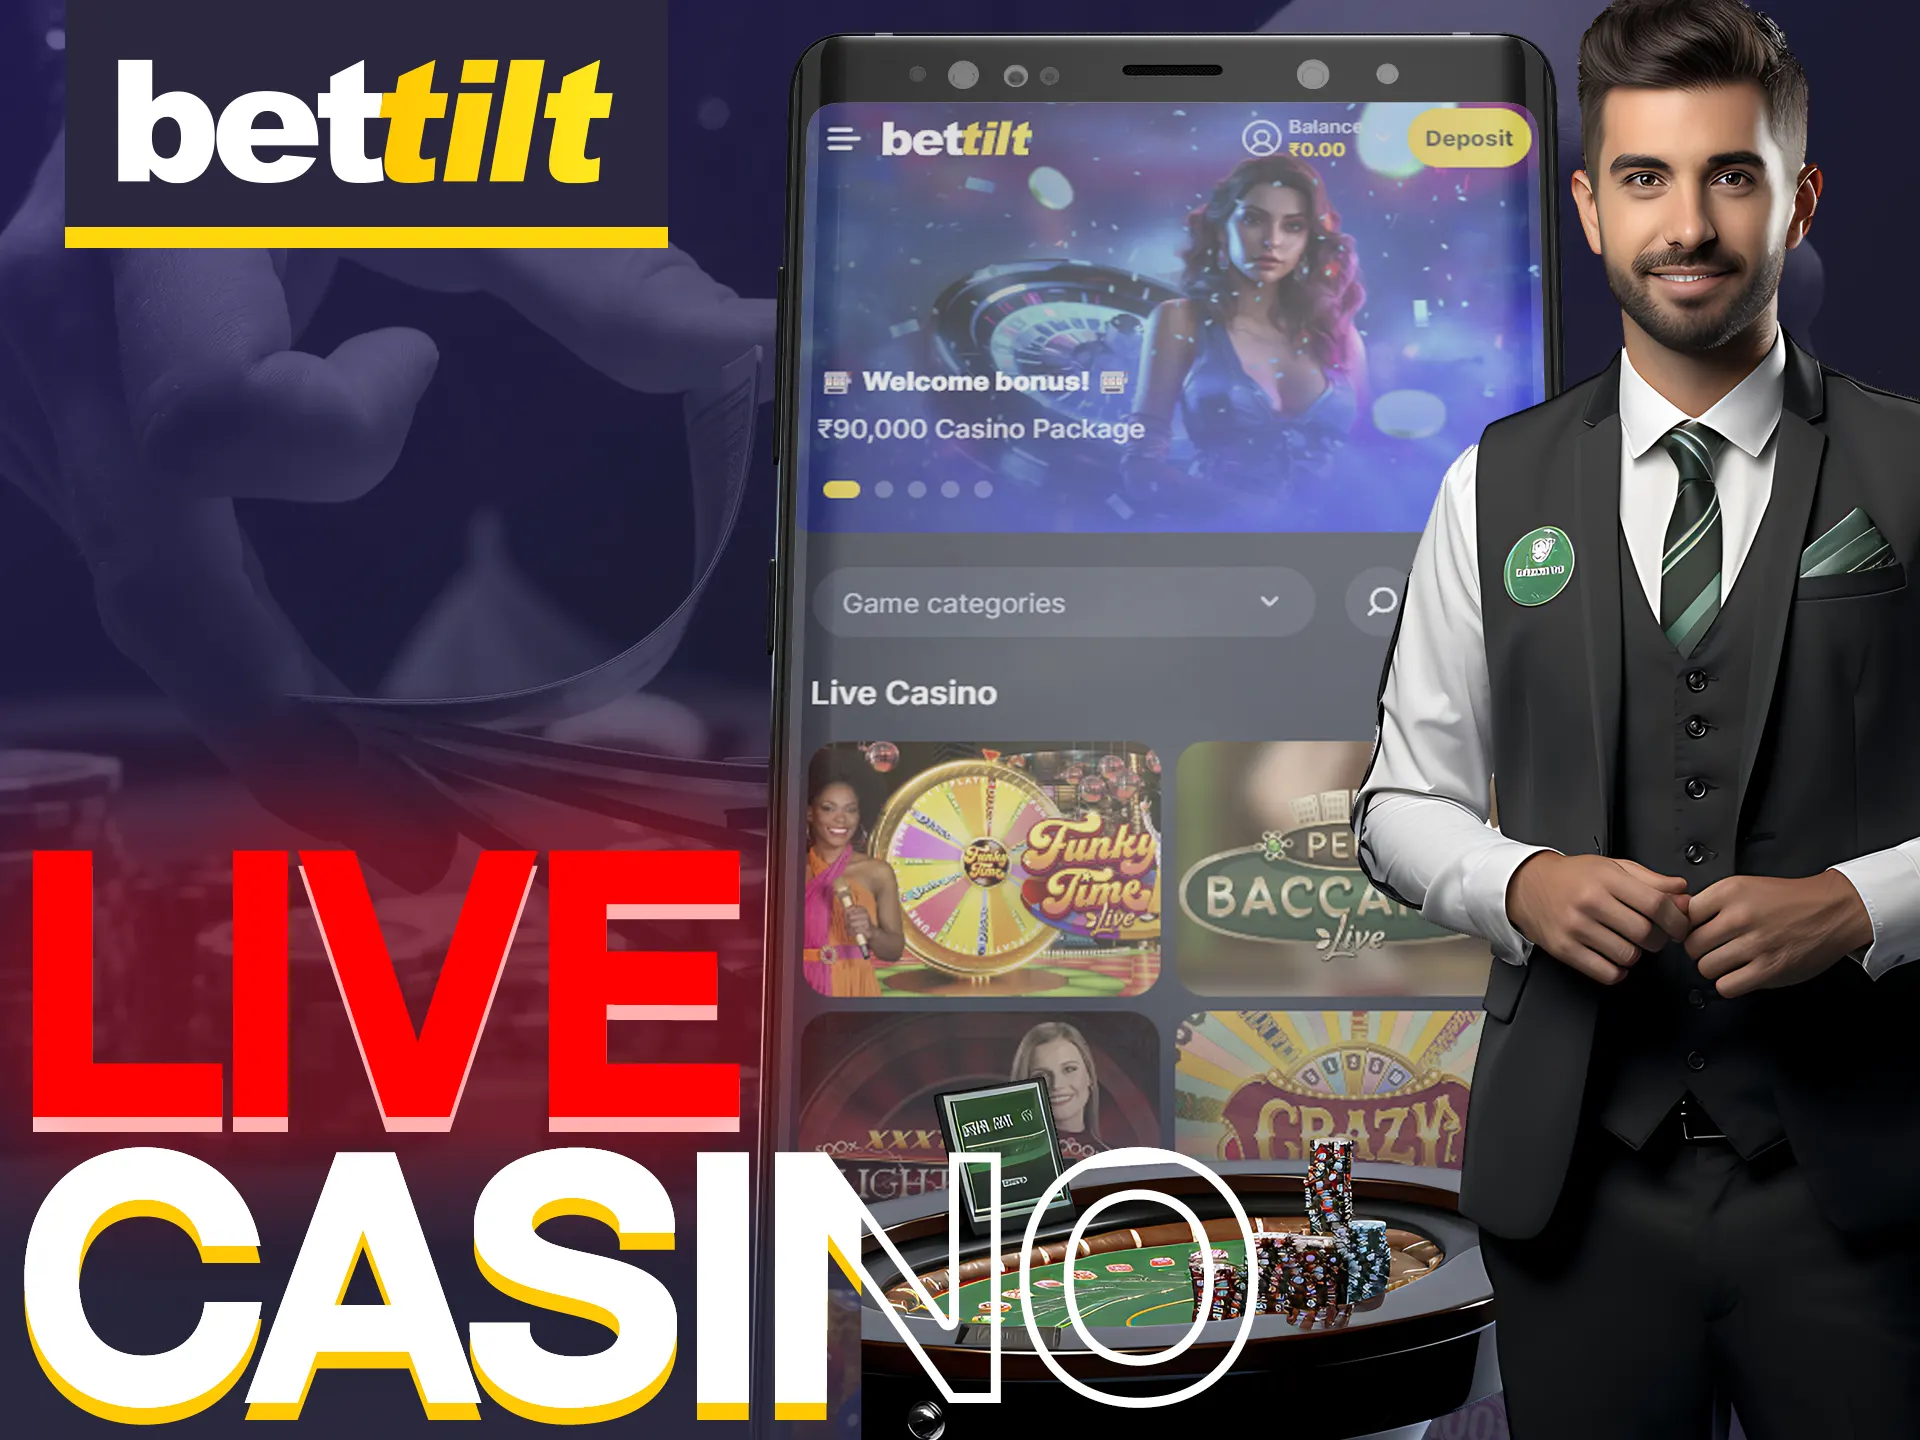 Bettilt app offers live casino with professional dealers.